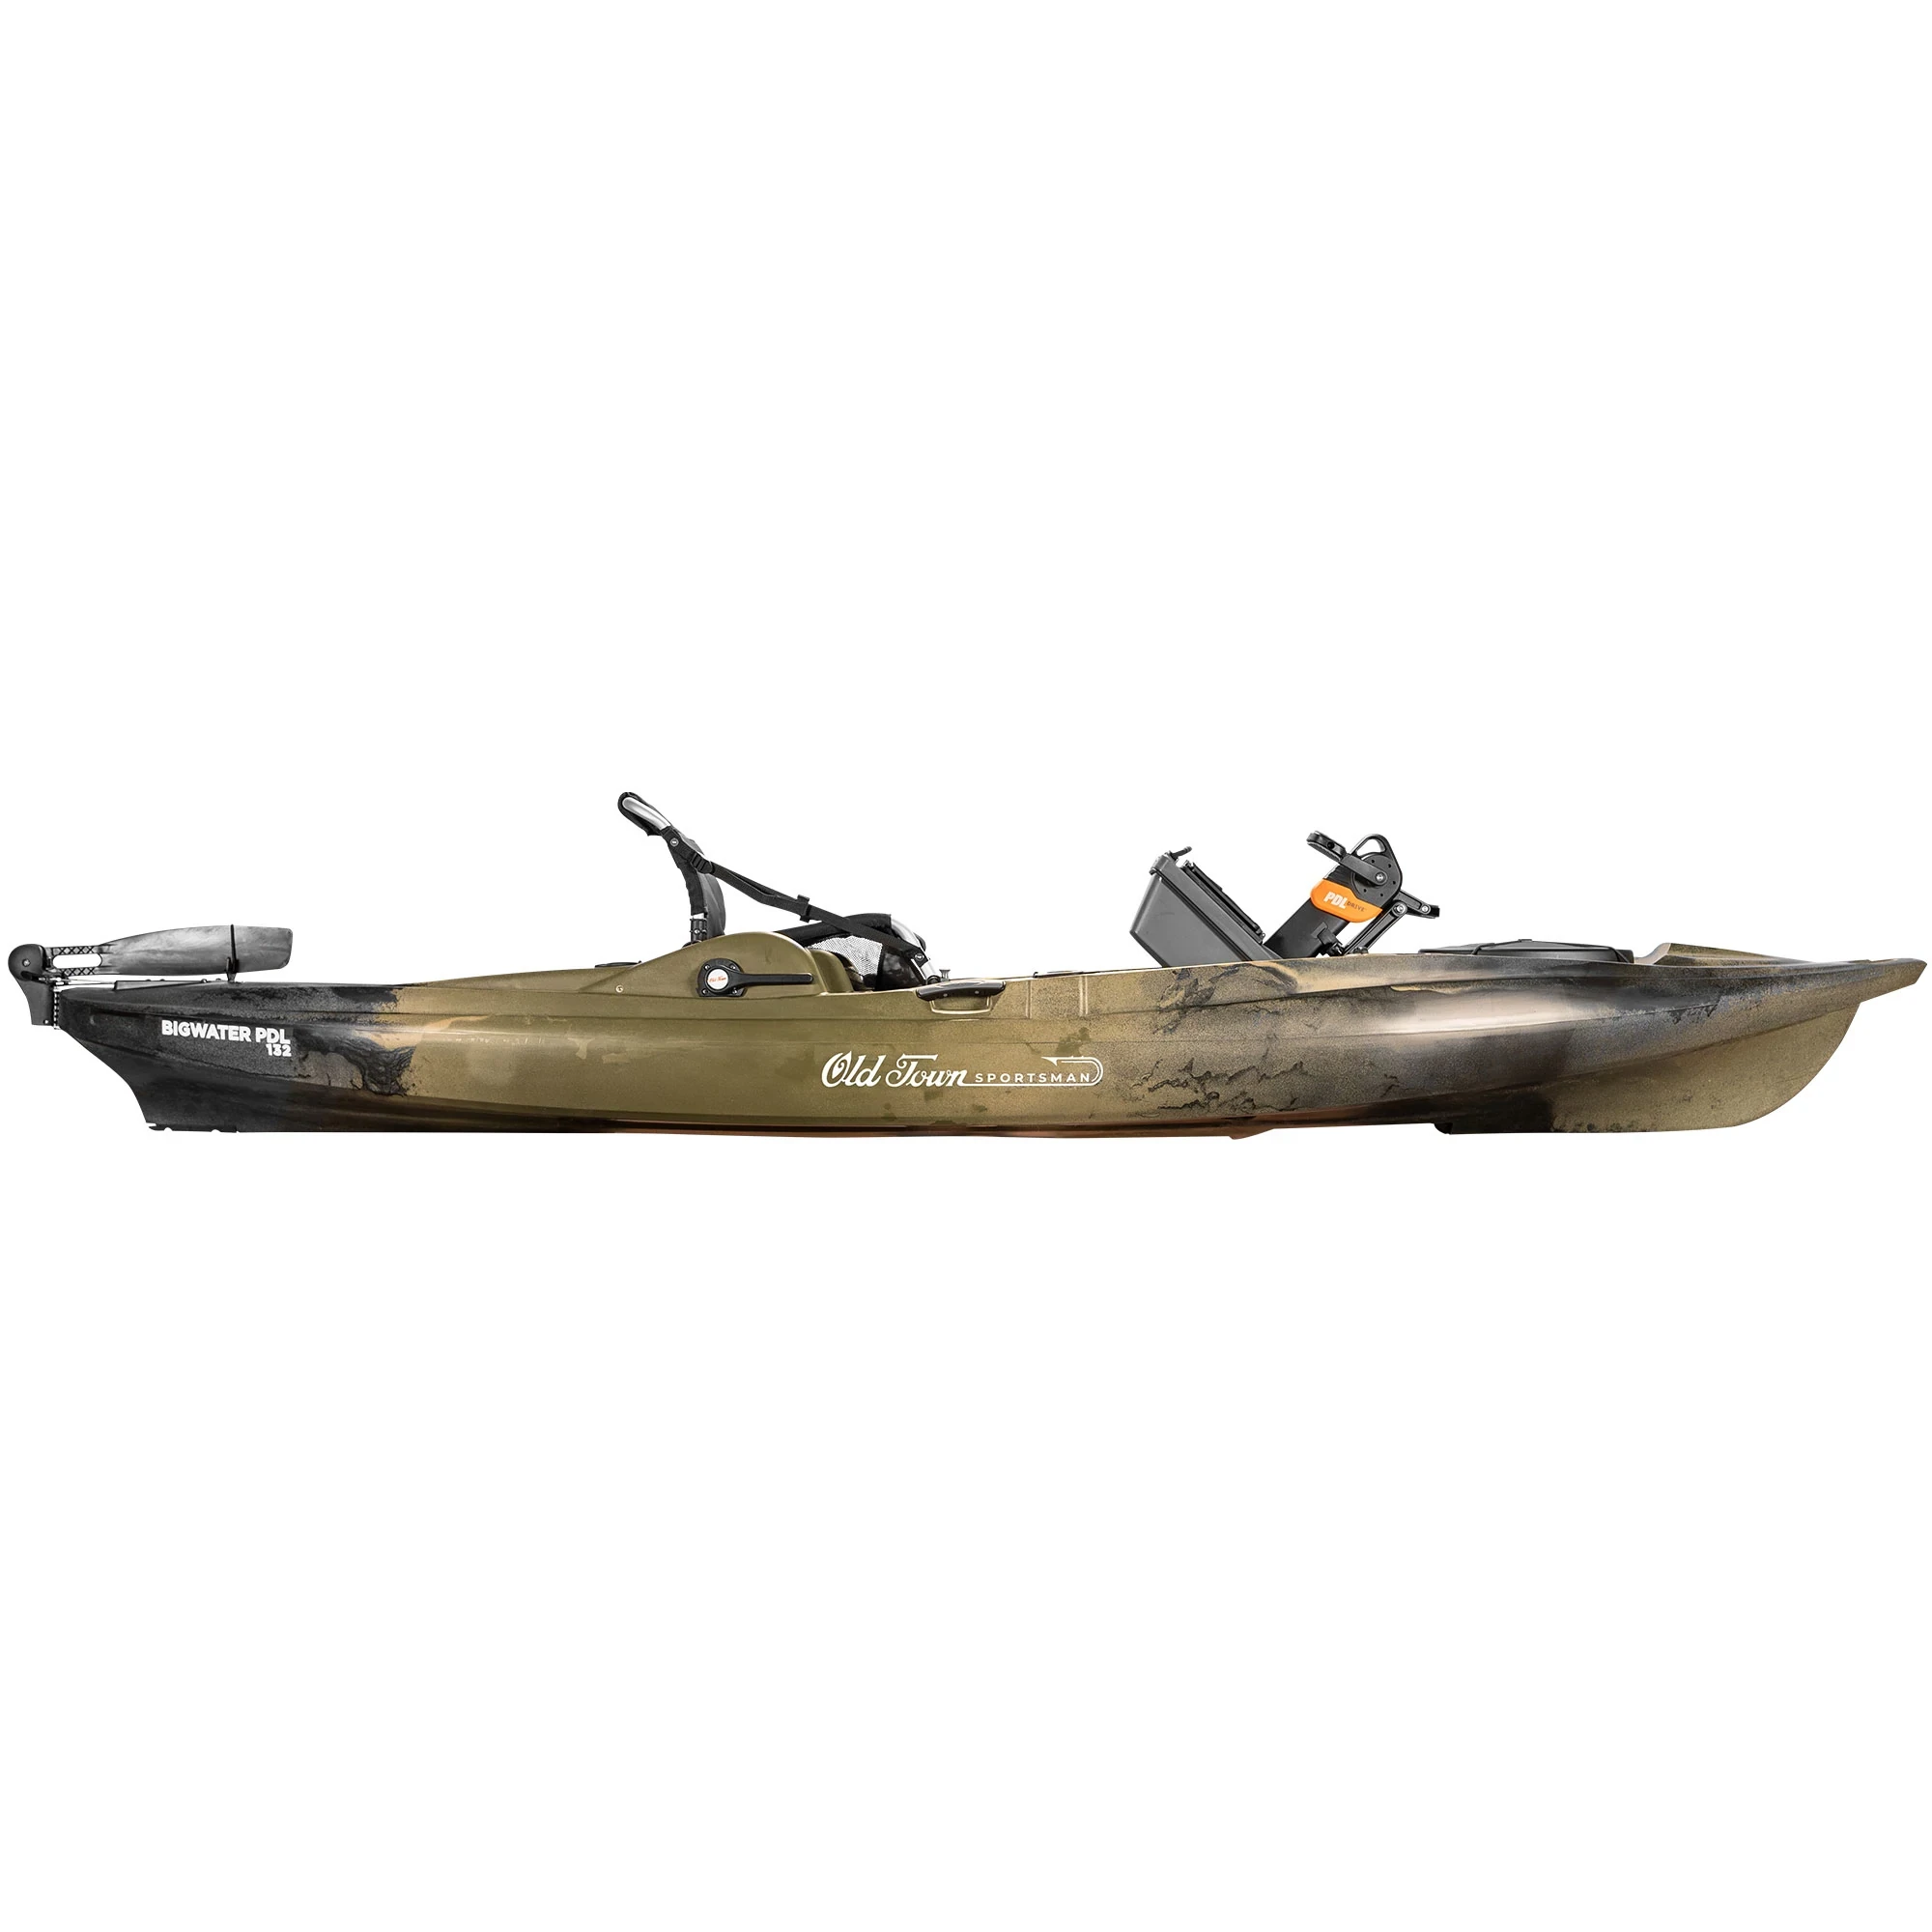 Old Town Sportsman BigWater PDL 132 - Marsh Camo - Side View